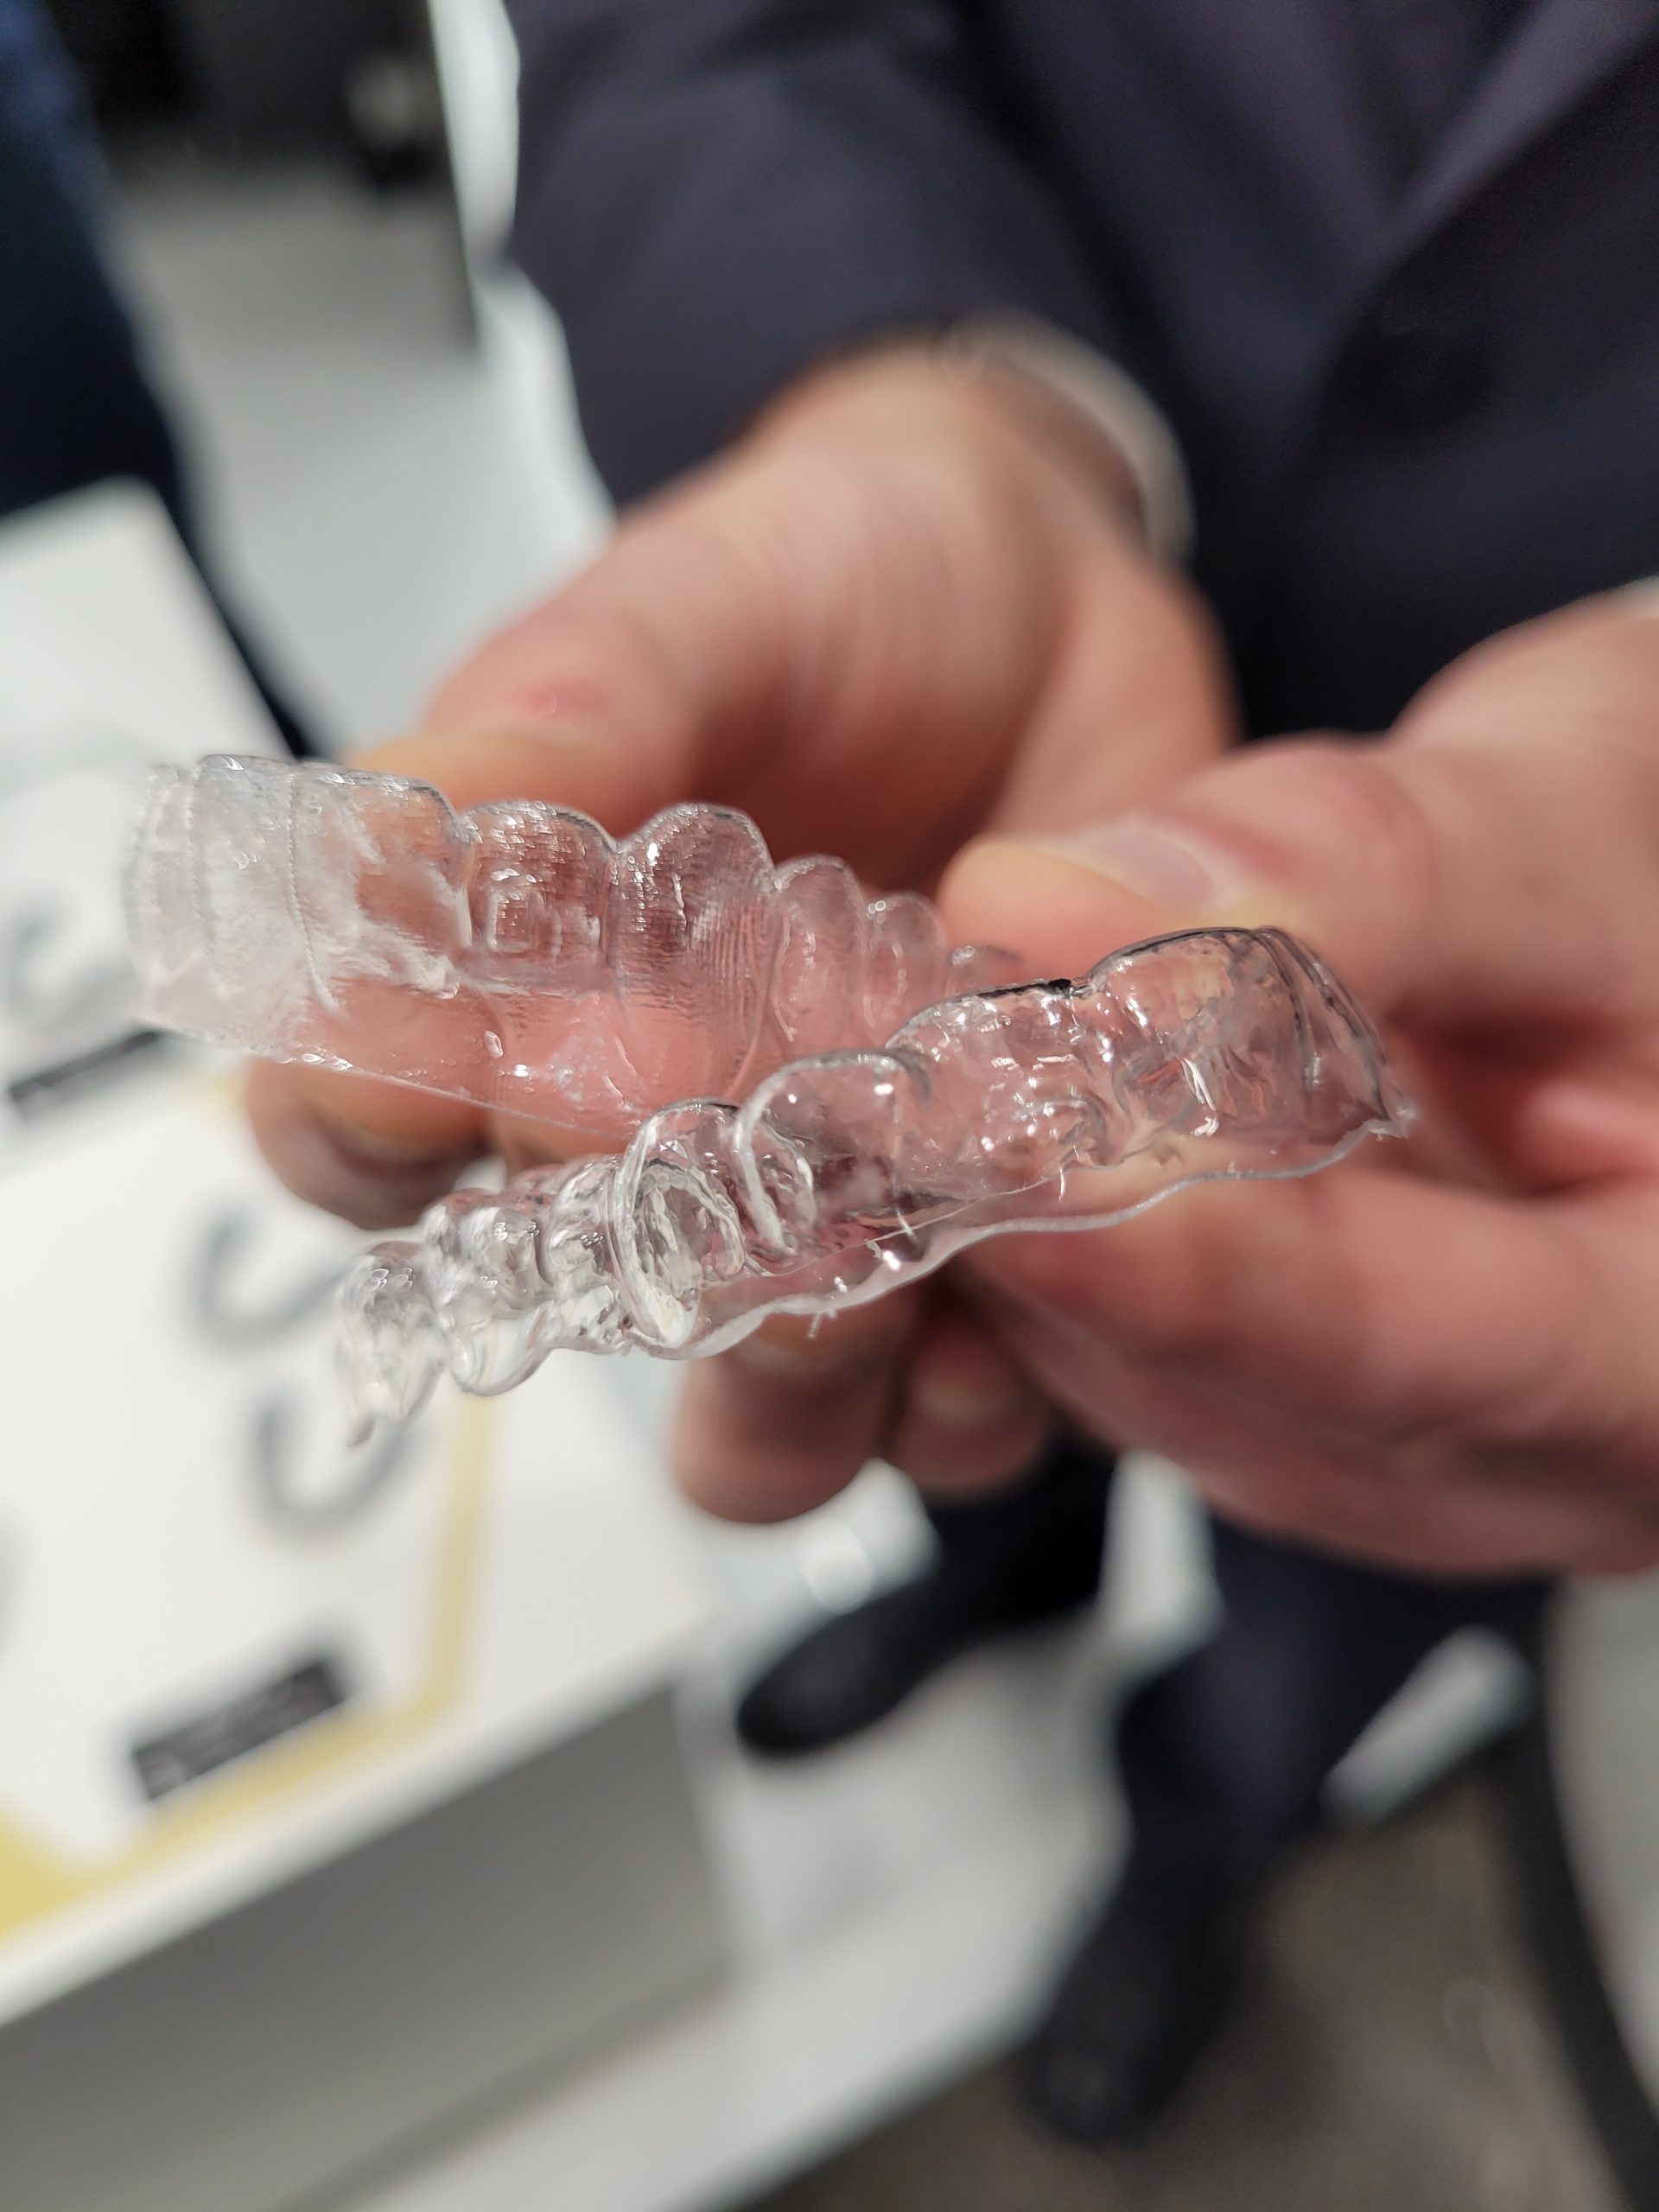 Comparing a HPS-printed dental aligner with a DLP-printed aligner. Photo via AXTRA3D.